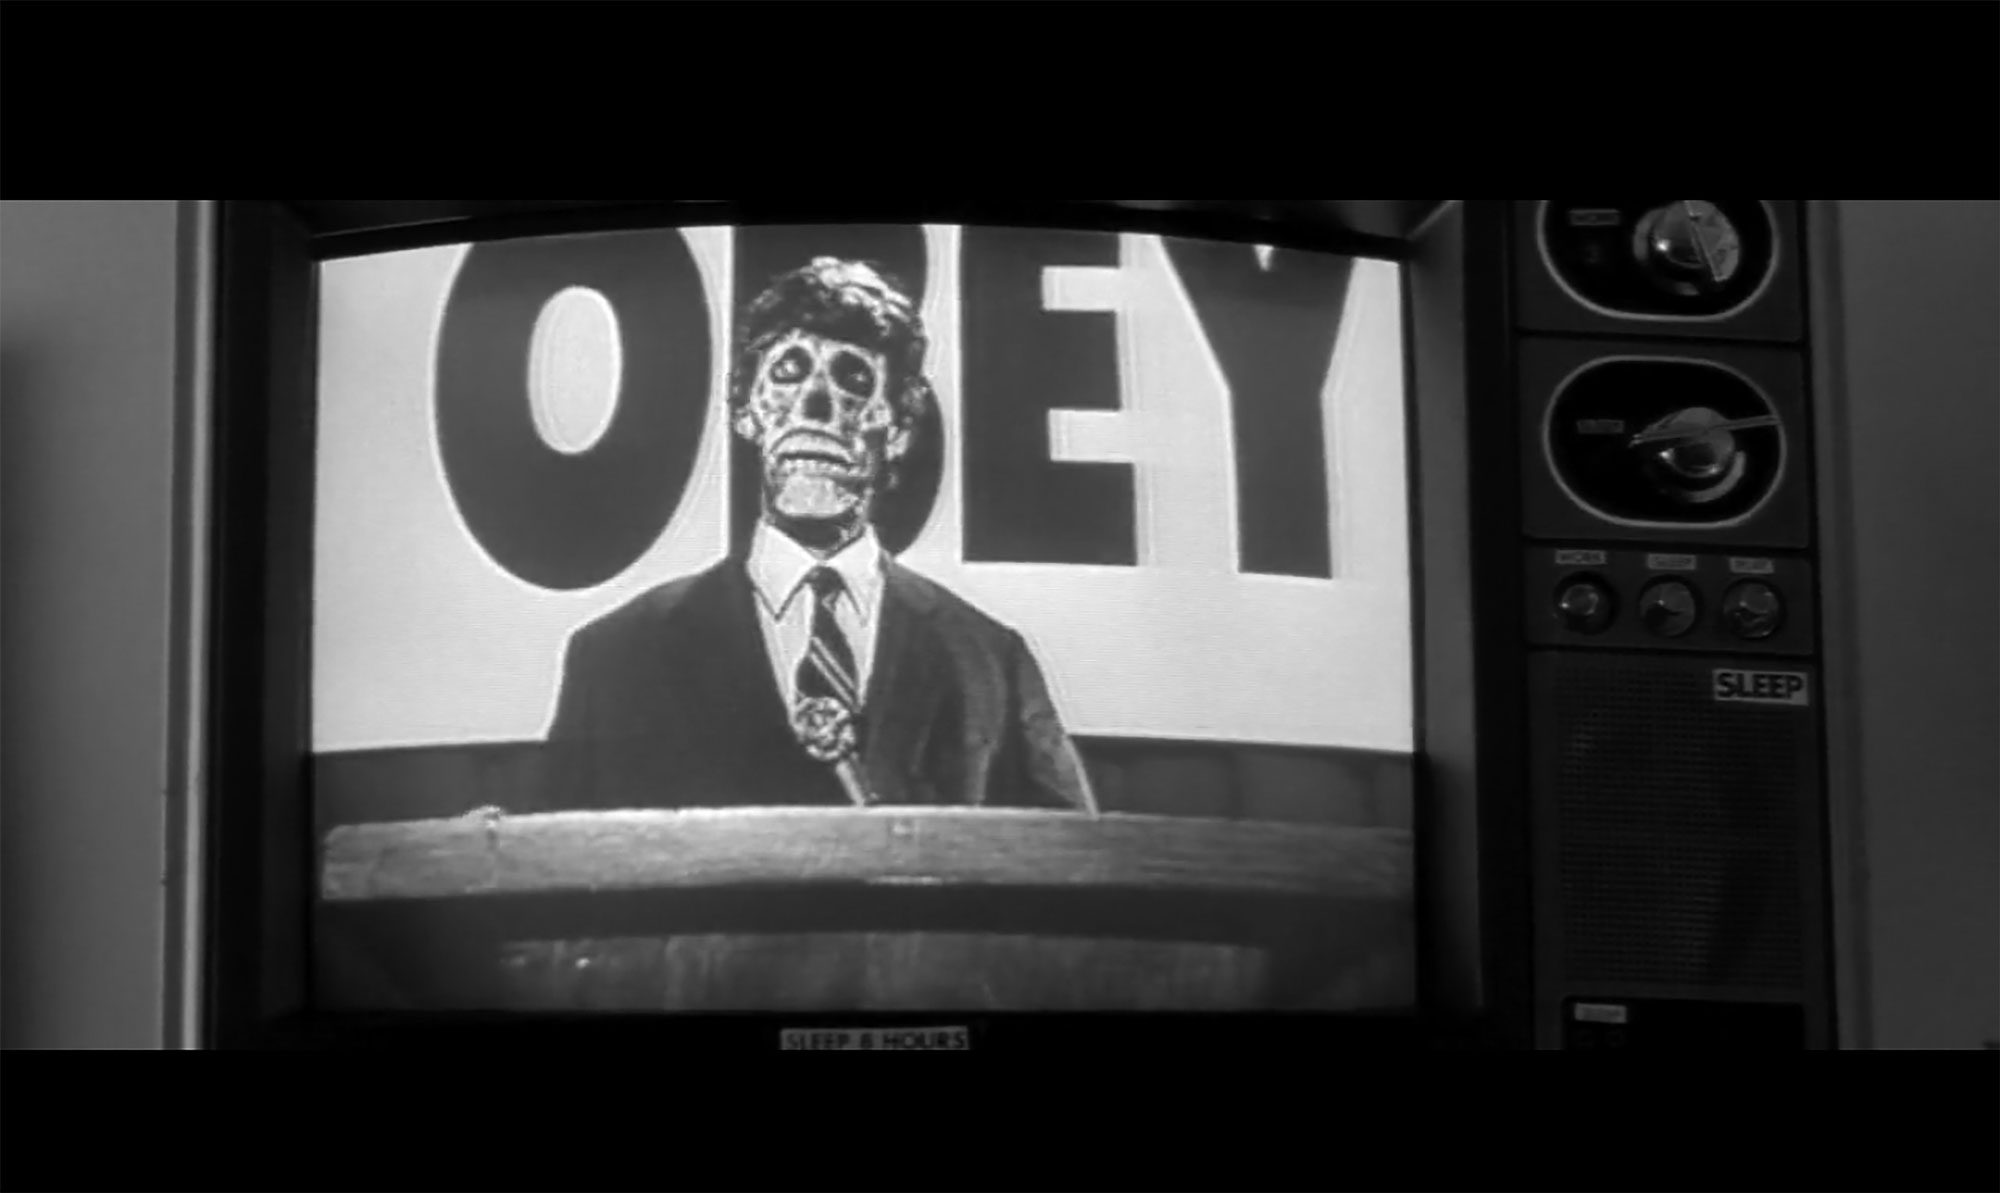 theylive_107_New News Gets Old Real Quick by Brian Polk